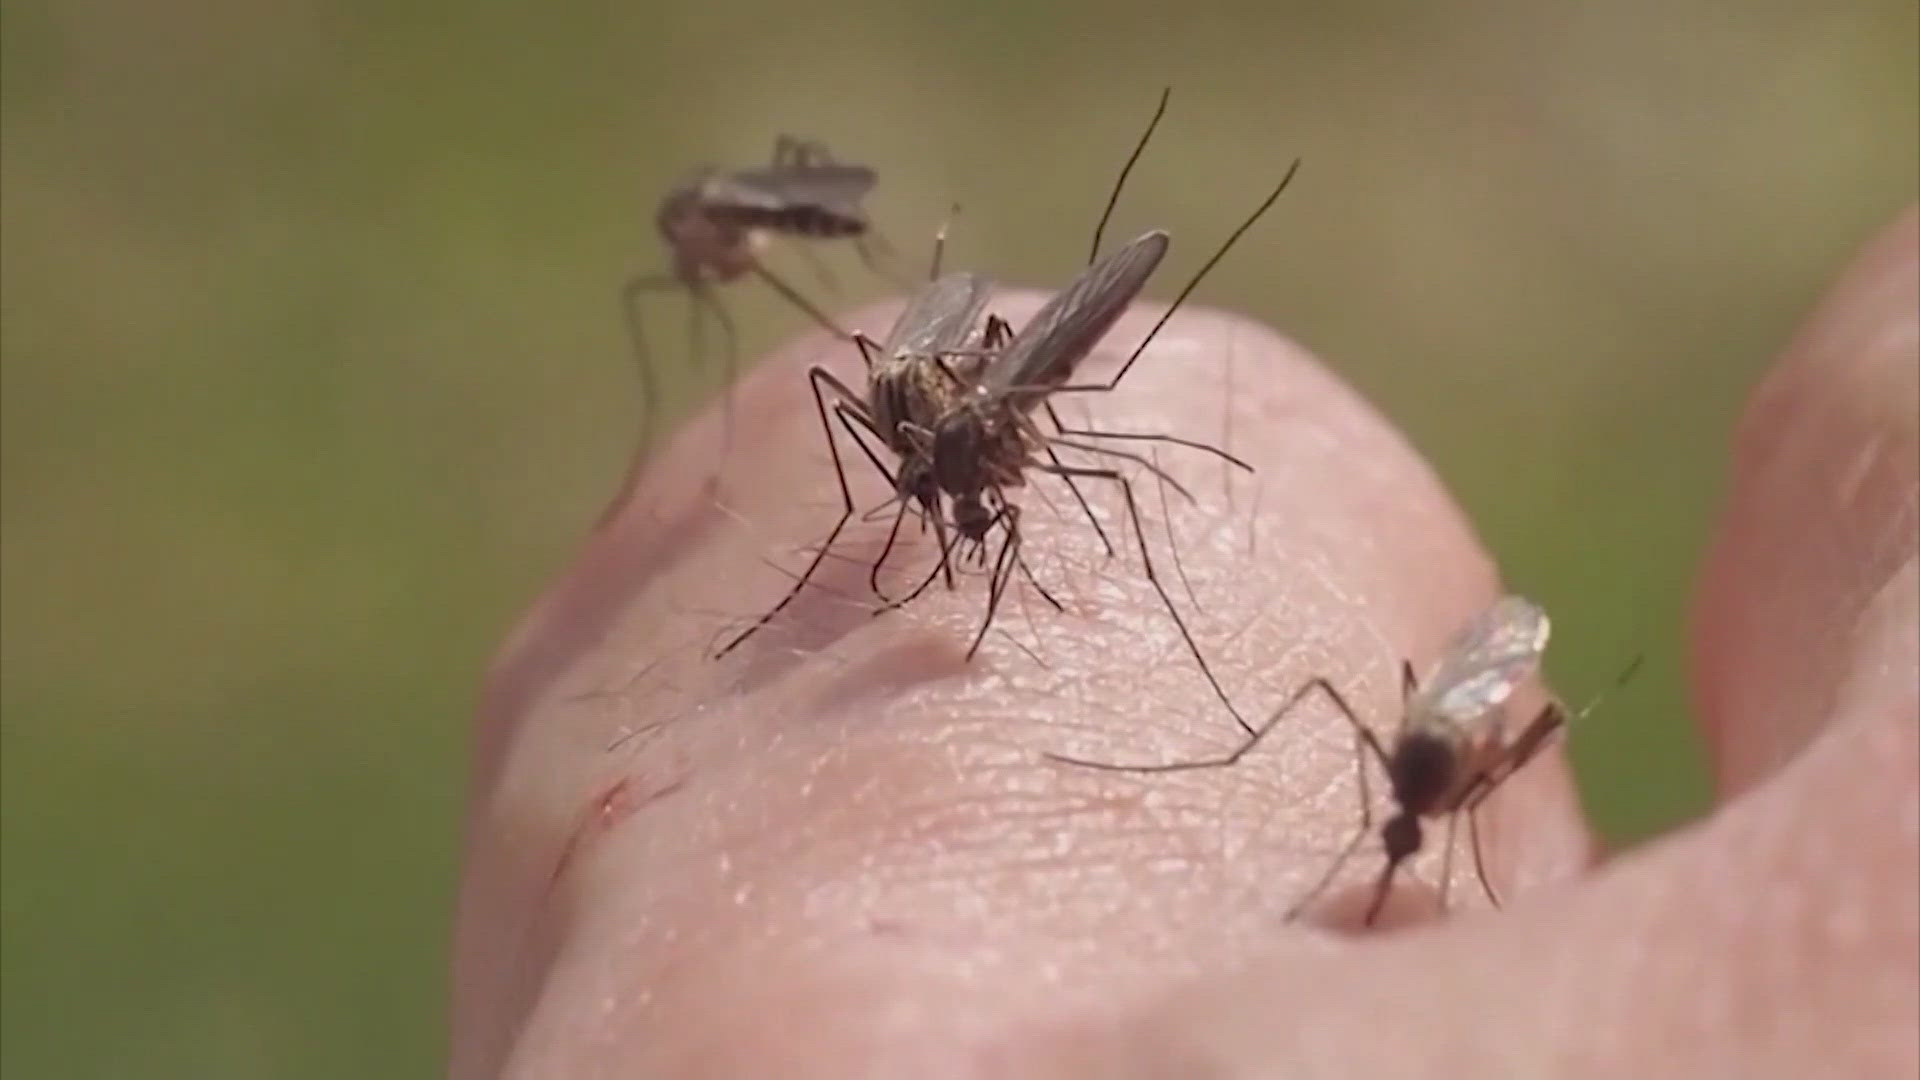 Director of the Harris County Public Health Mosquito Control Division, Dr. Max Vigilant, said his team has been busy setting up mosquito traps.